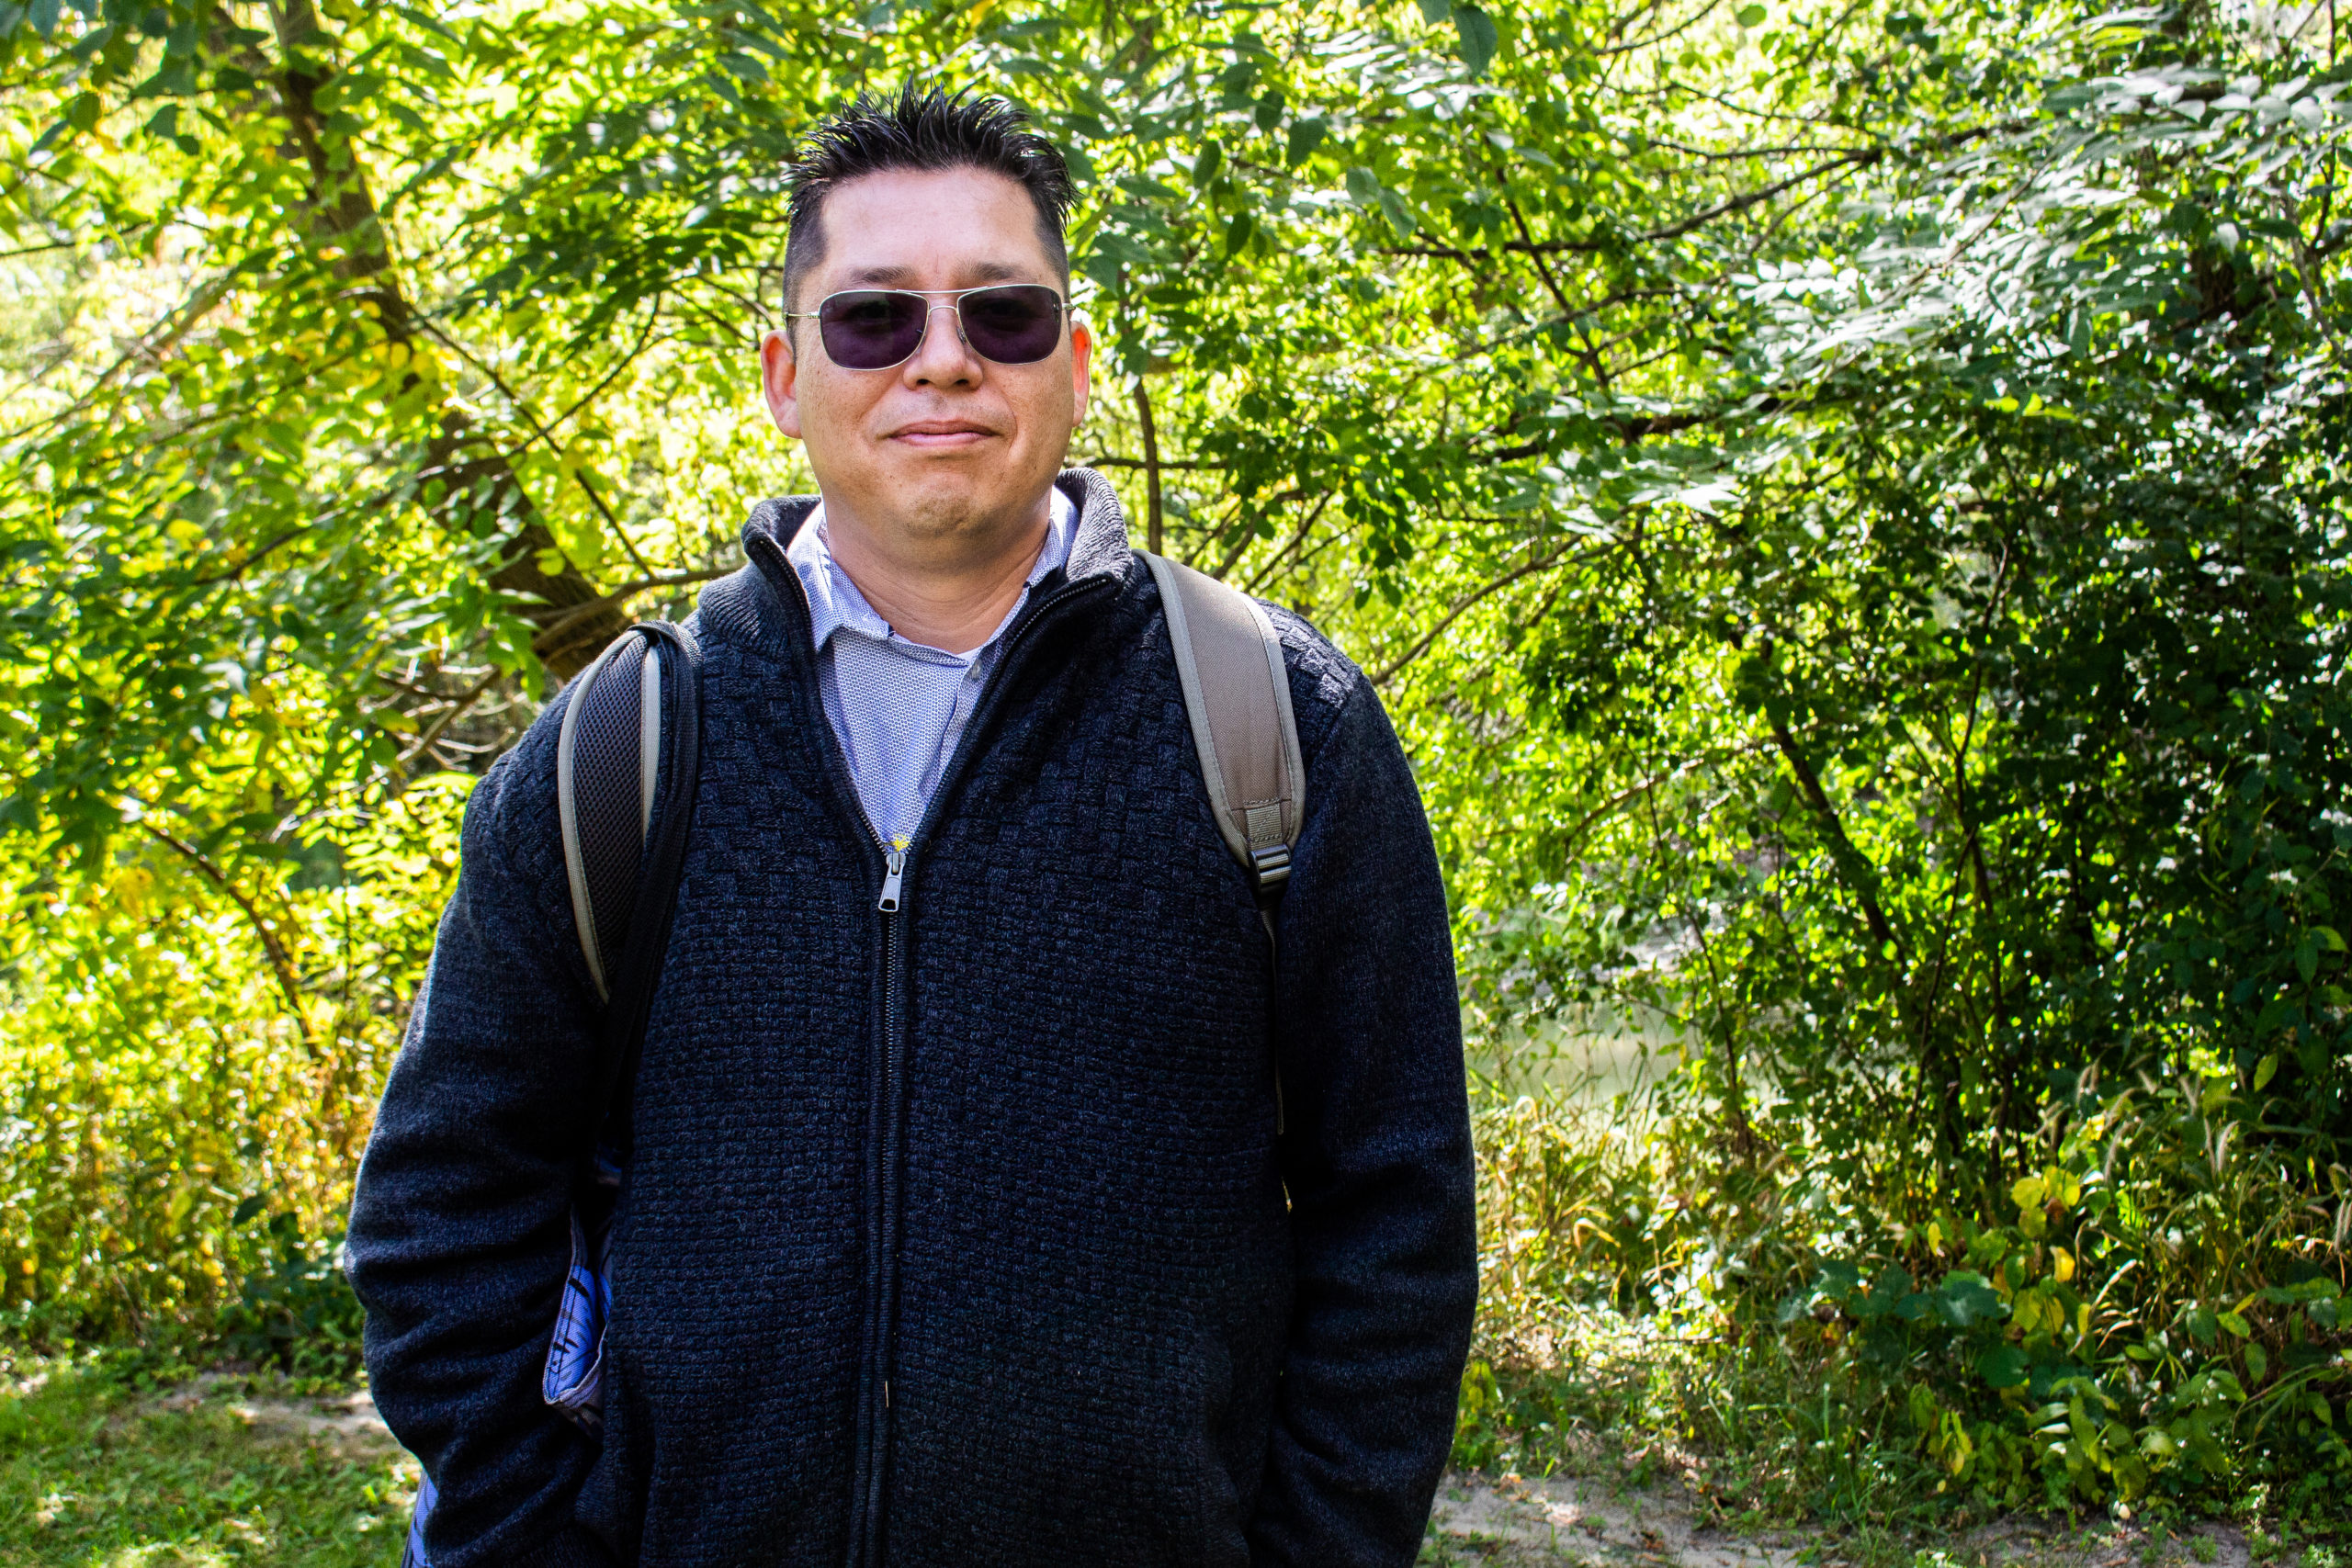 James Carpenter smiling at the camera and wearing dark sunglasses, a navy sweater and a backpack. James stands in front of a forest.